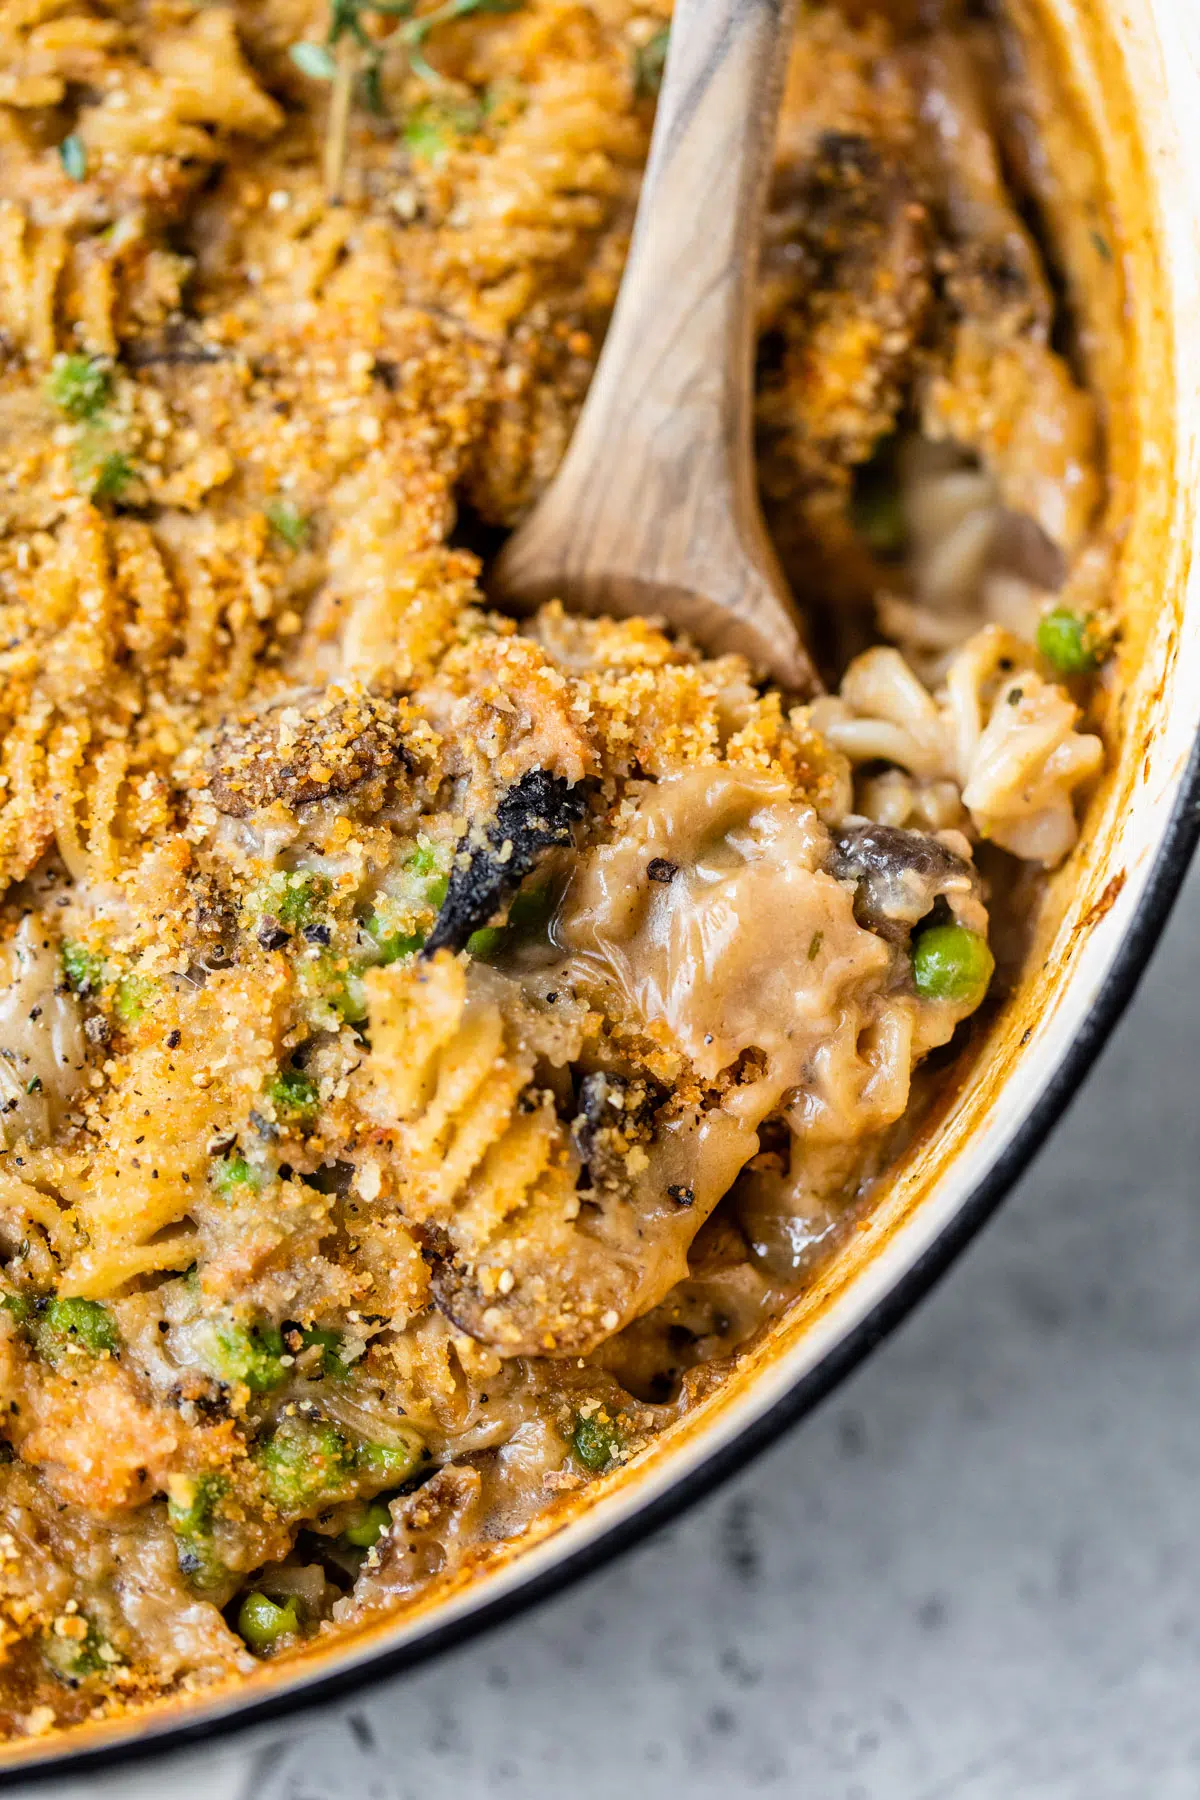 wooden spoon scooping a noodle casserole